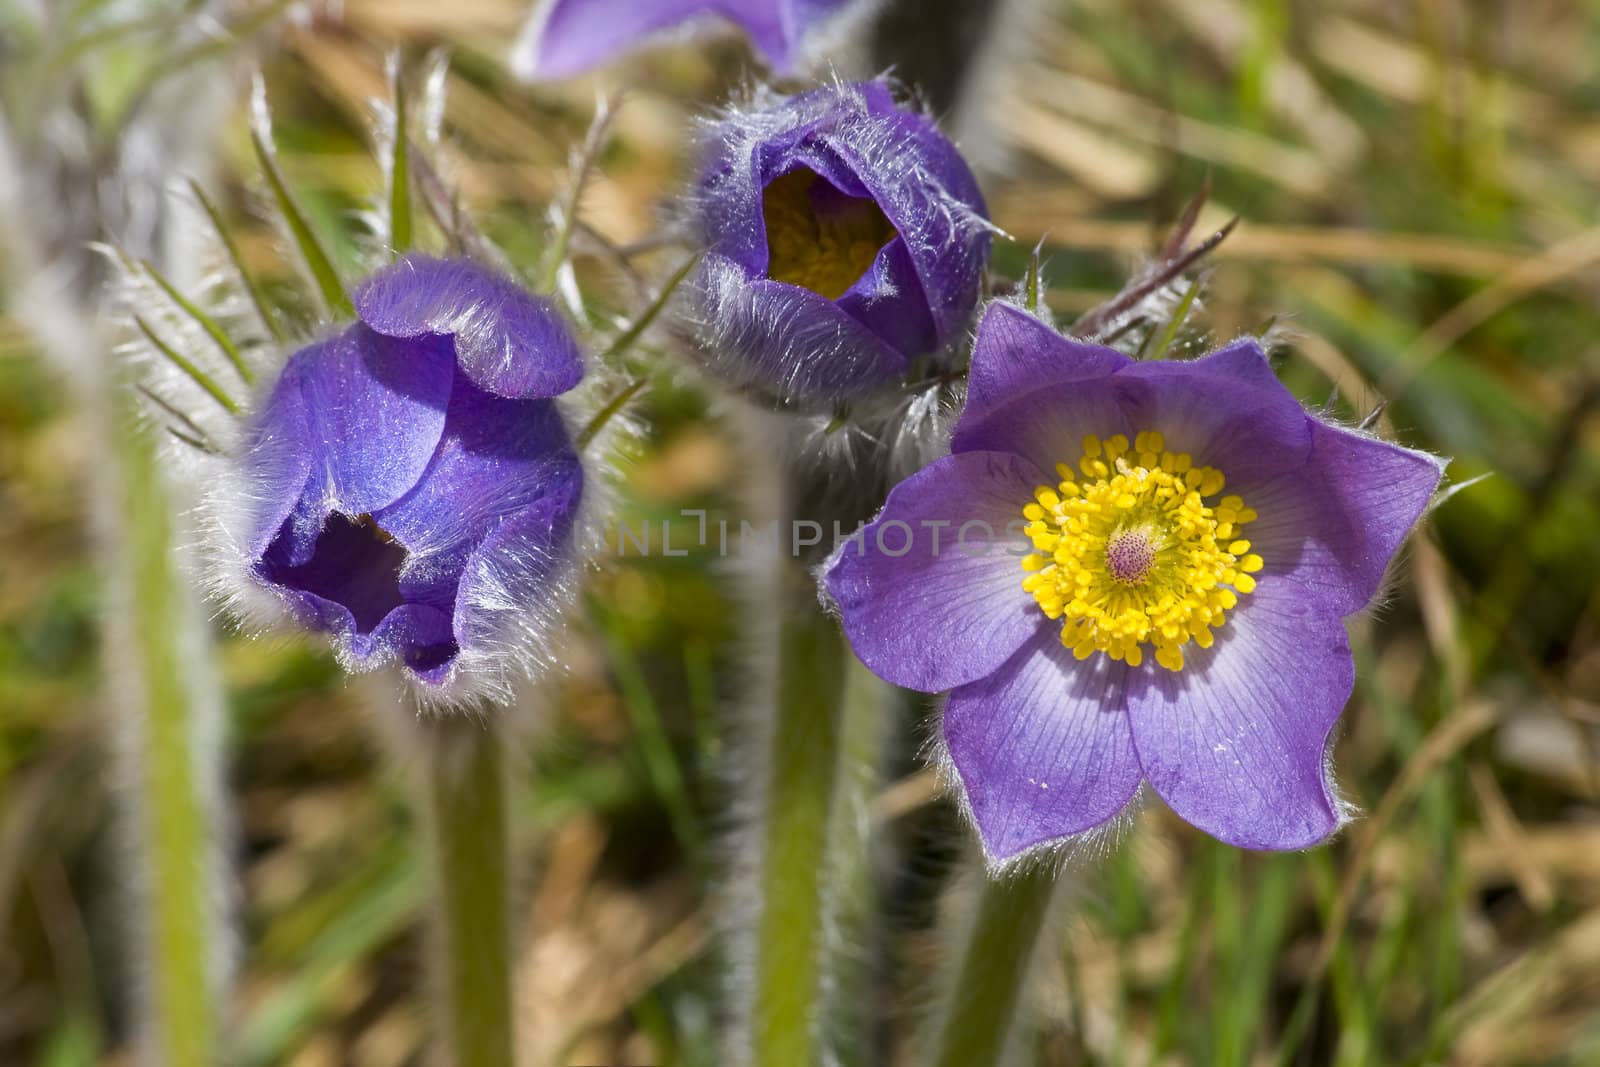 Common pasque flower (pulsatilla vulgaris), one of the earliest flowers in spring